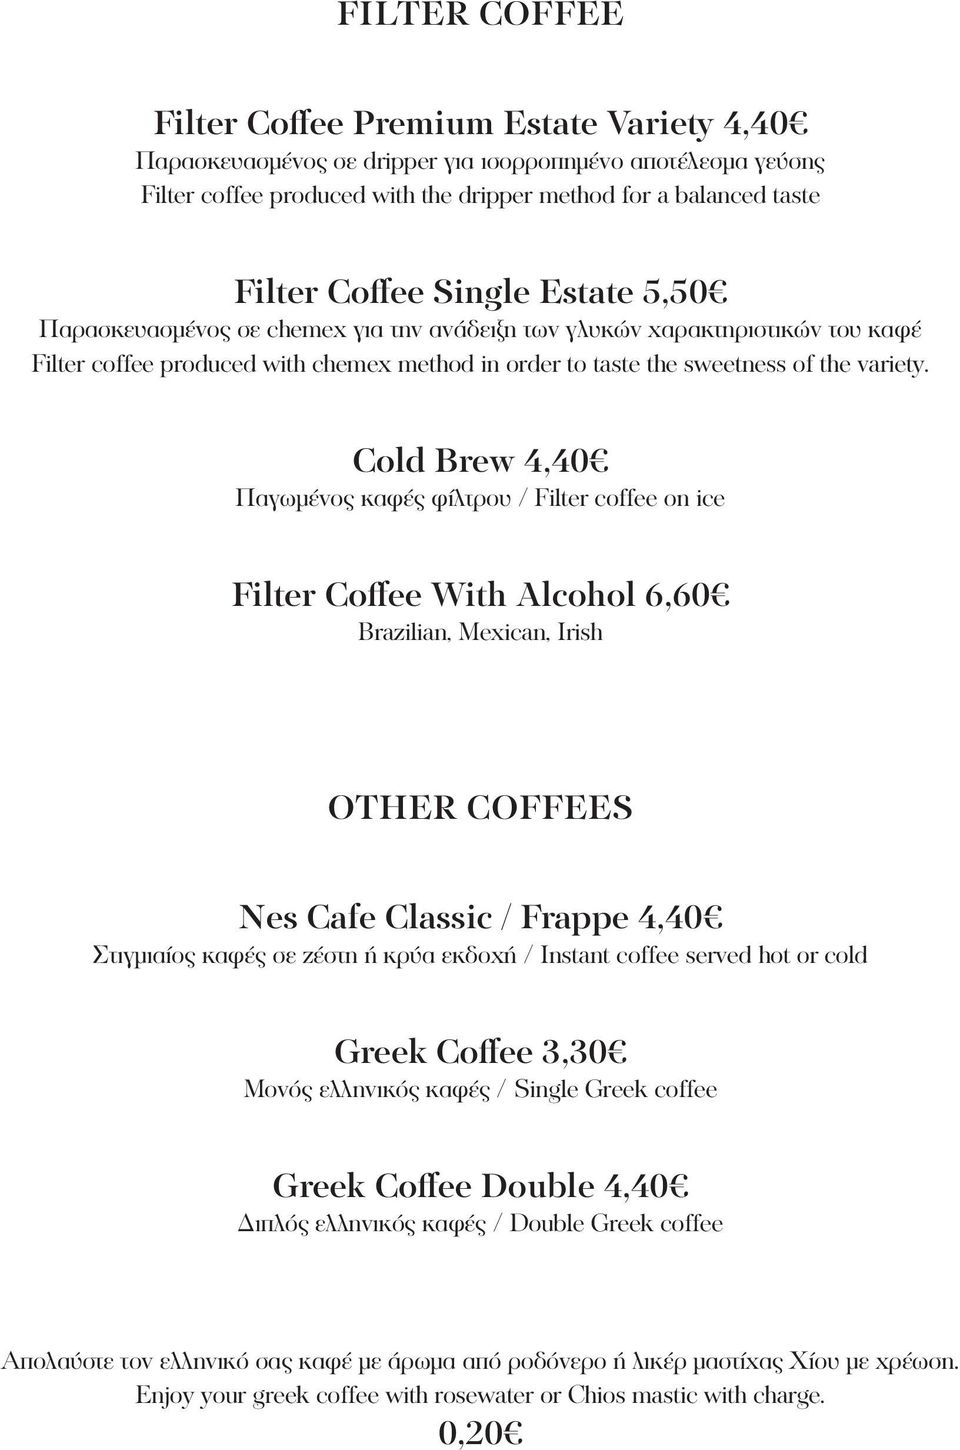 Cold Brew 4,40 Παγωμένος καφές φίλτρου / Filter coffee on ice Filter Coffee With Alcohol 6,60 Brazilian, Mexican, Irish OTHER COFFEES Nes Cafe Classic / Frappe 4,40 Στιγμιαίος καφές σε ζέστη ή κρύα